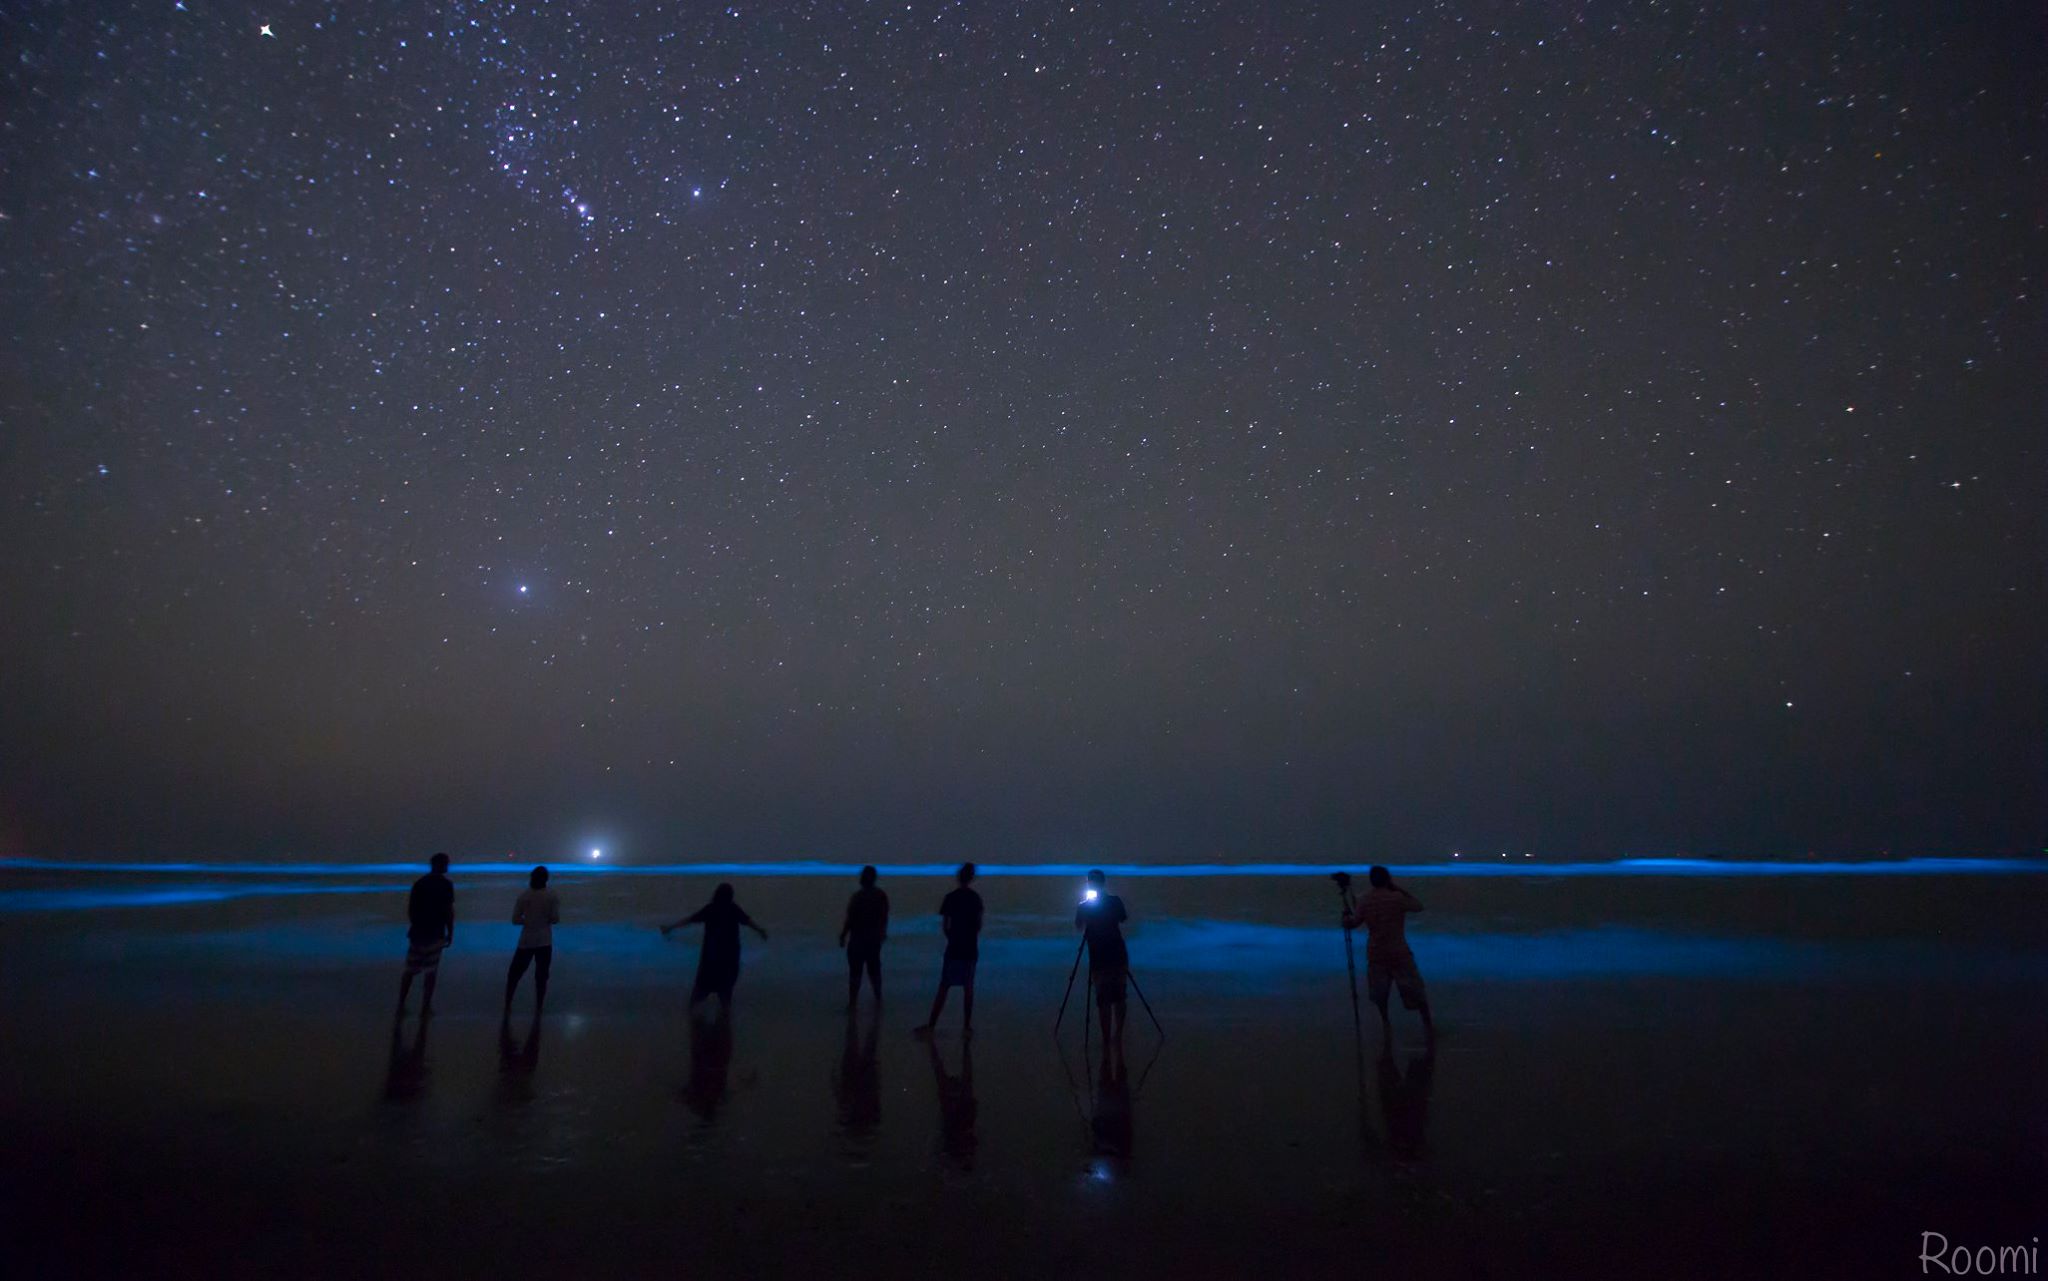 Bioluminescence at Sapat Beach, Baluchistan. Most people are not aware of this.